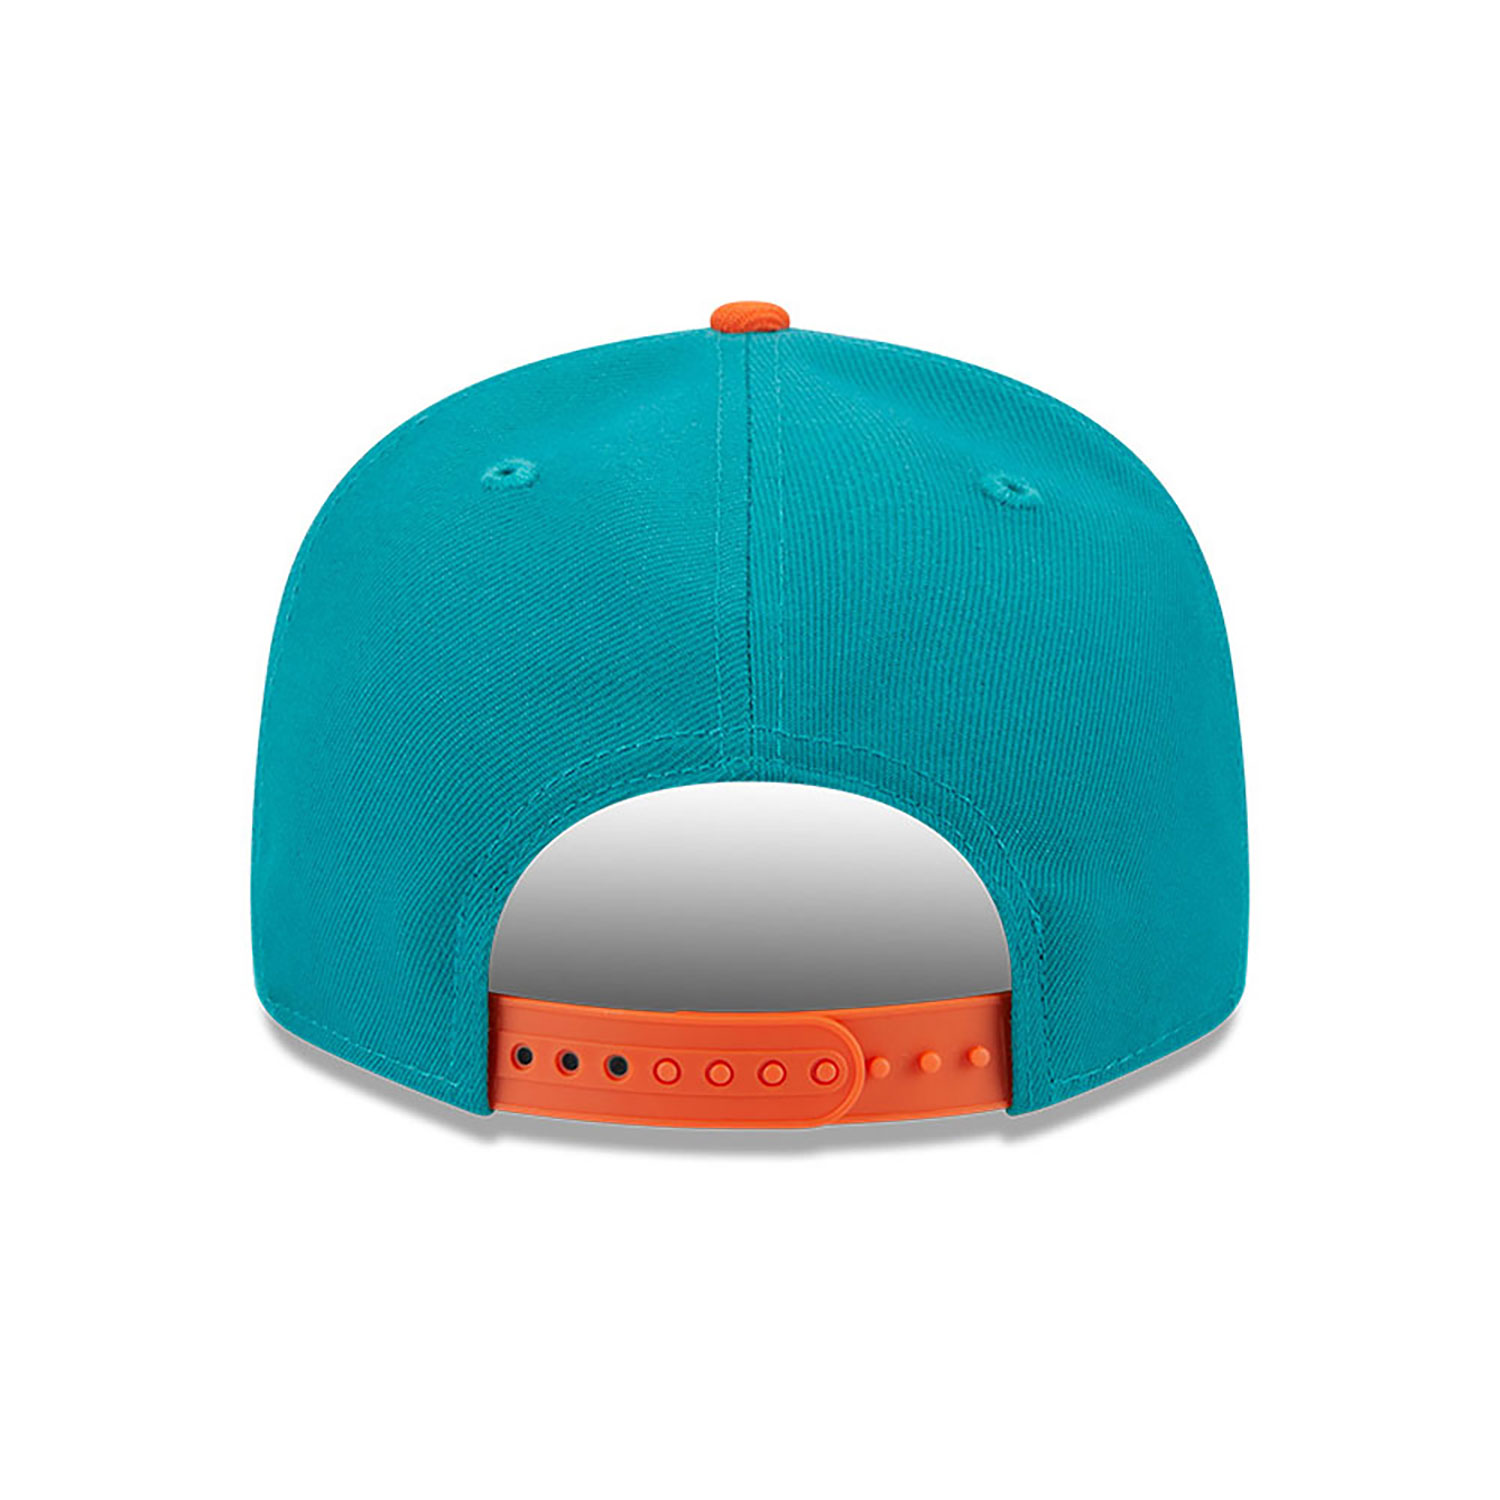 Miami Dolphins NFL City Originals Turquoise 9FIFTY Snapback Cap